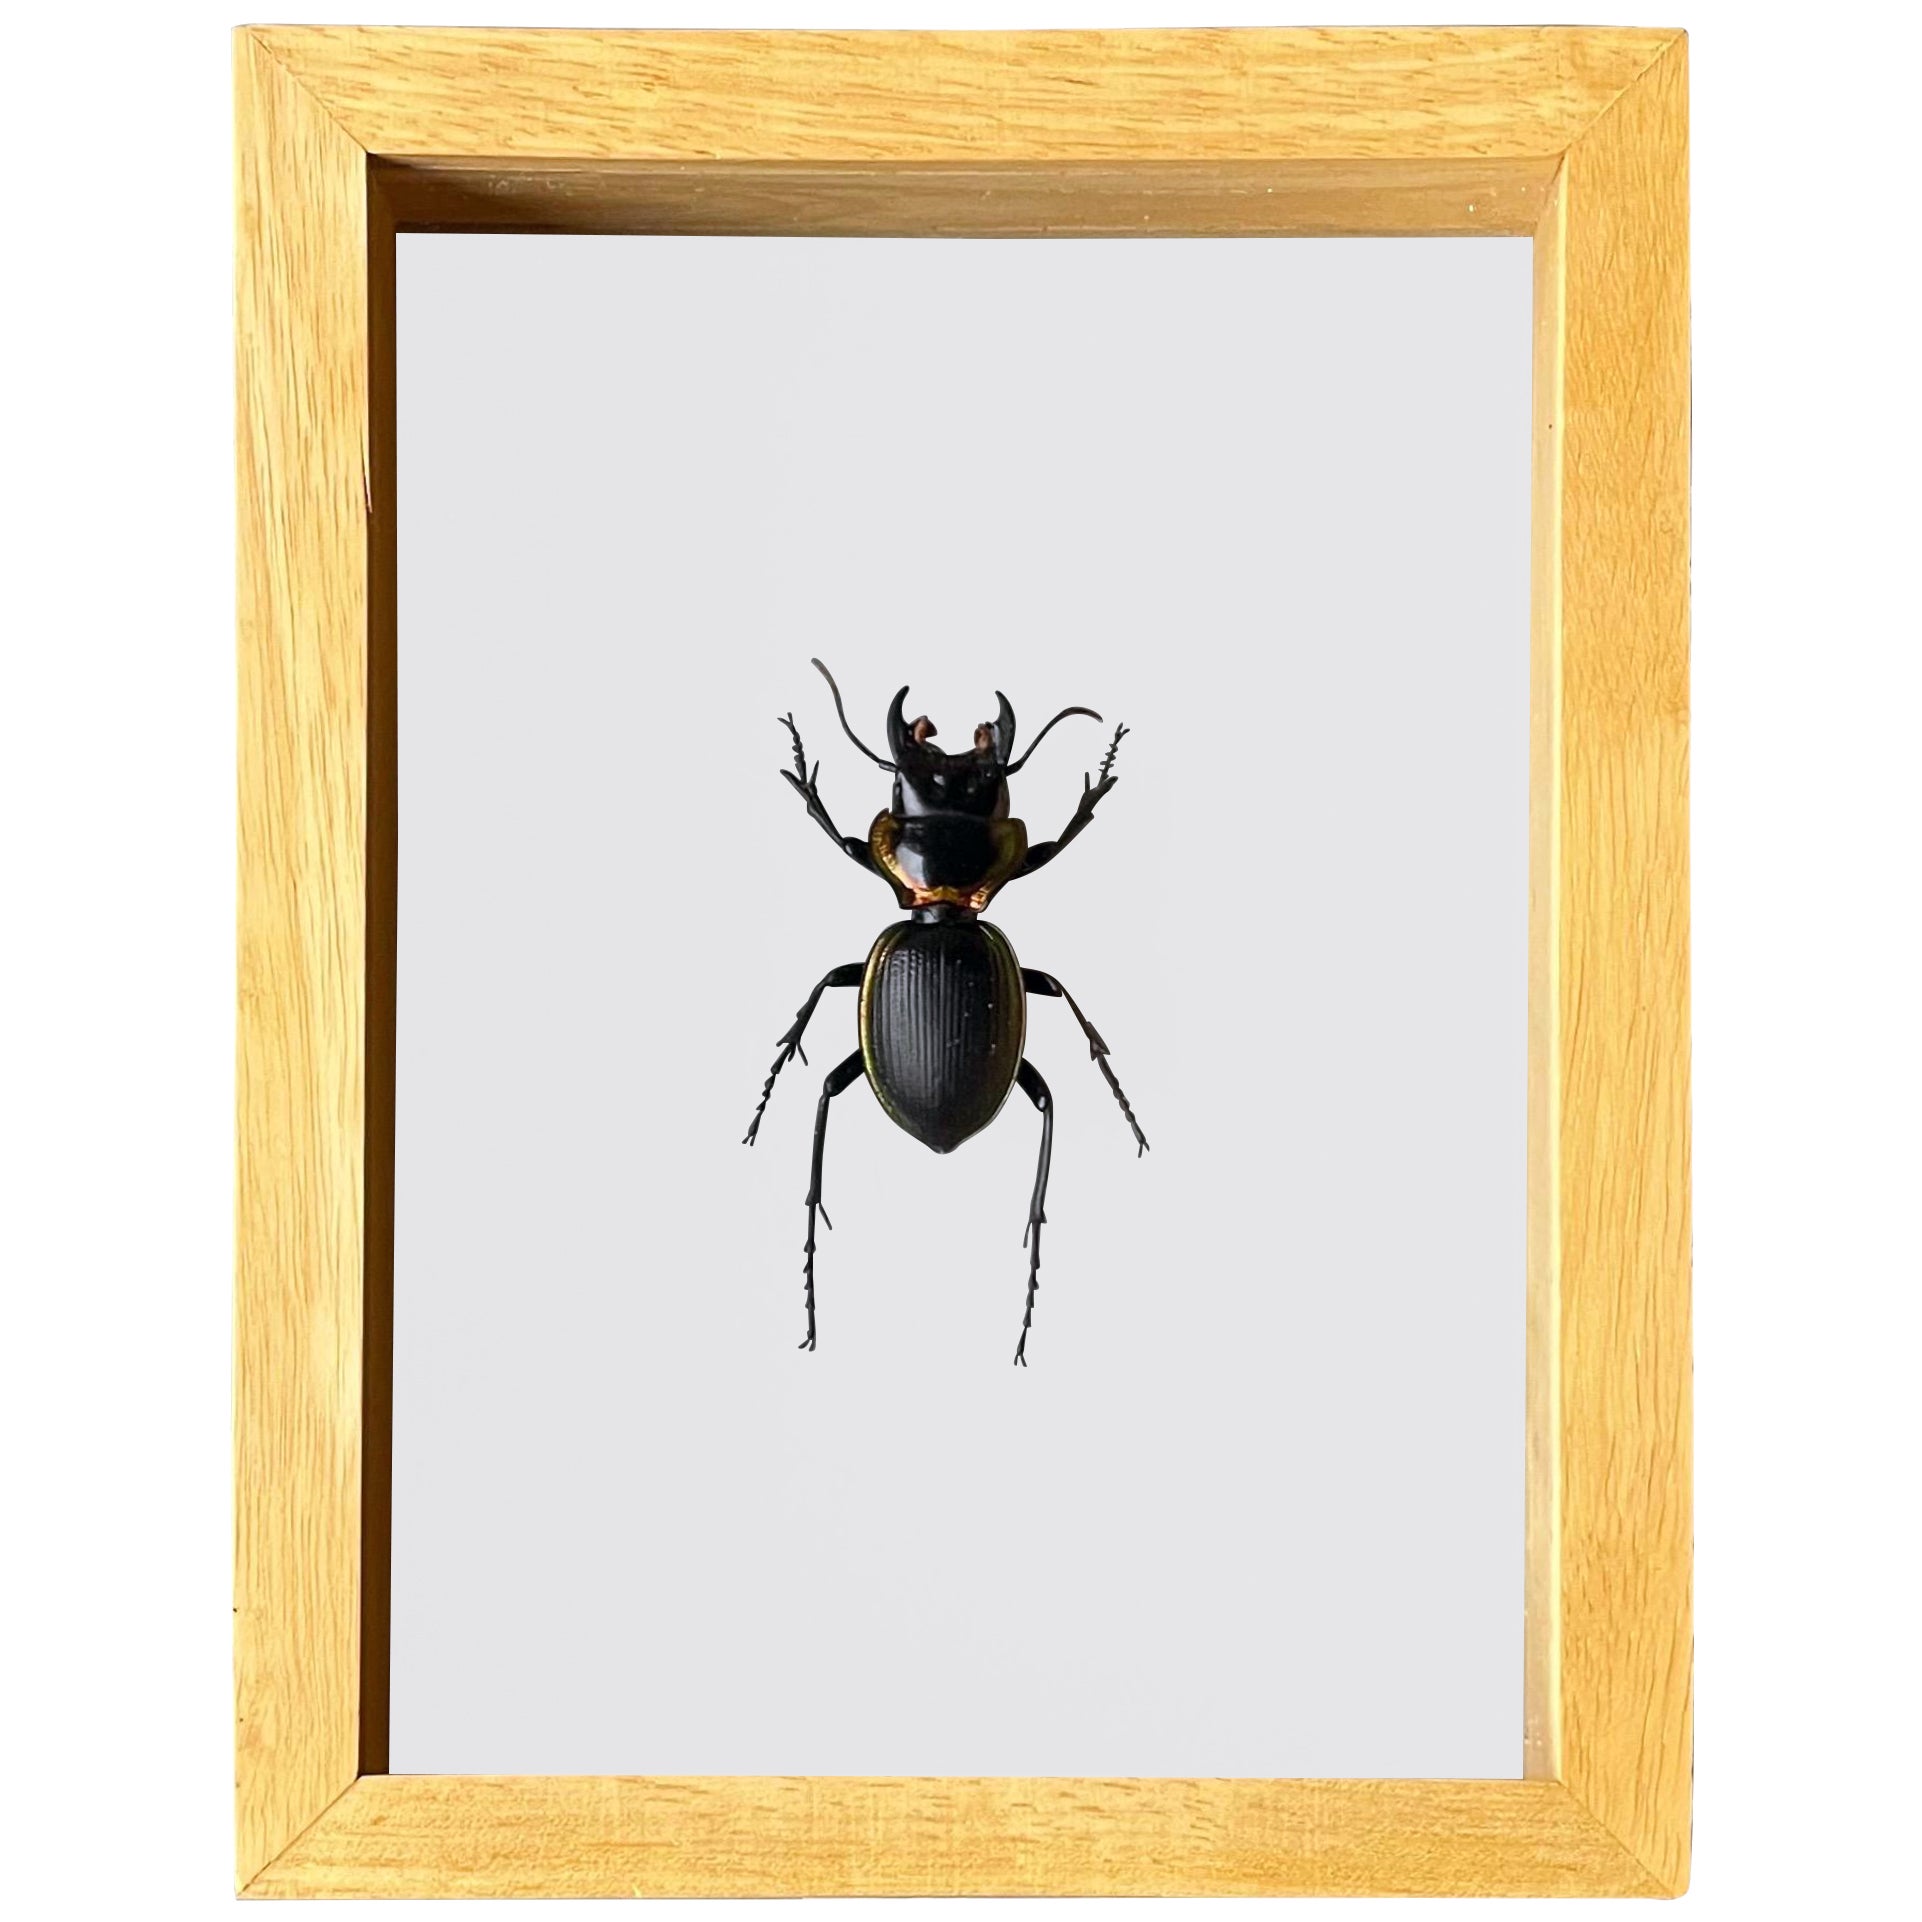 Authentic "Mouhotia Planipennis" Beetle Taxidermy Sculpture